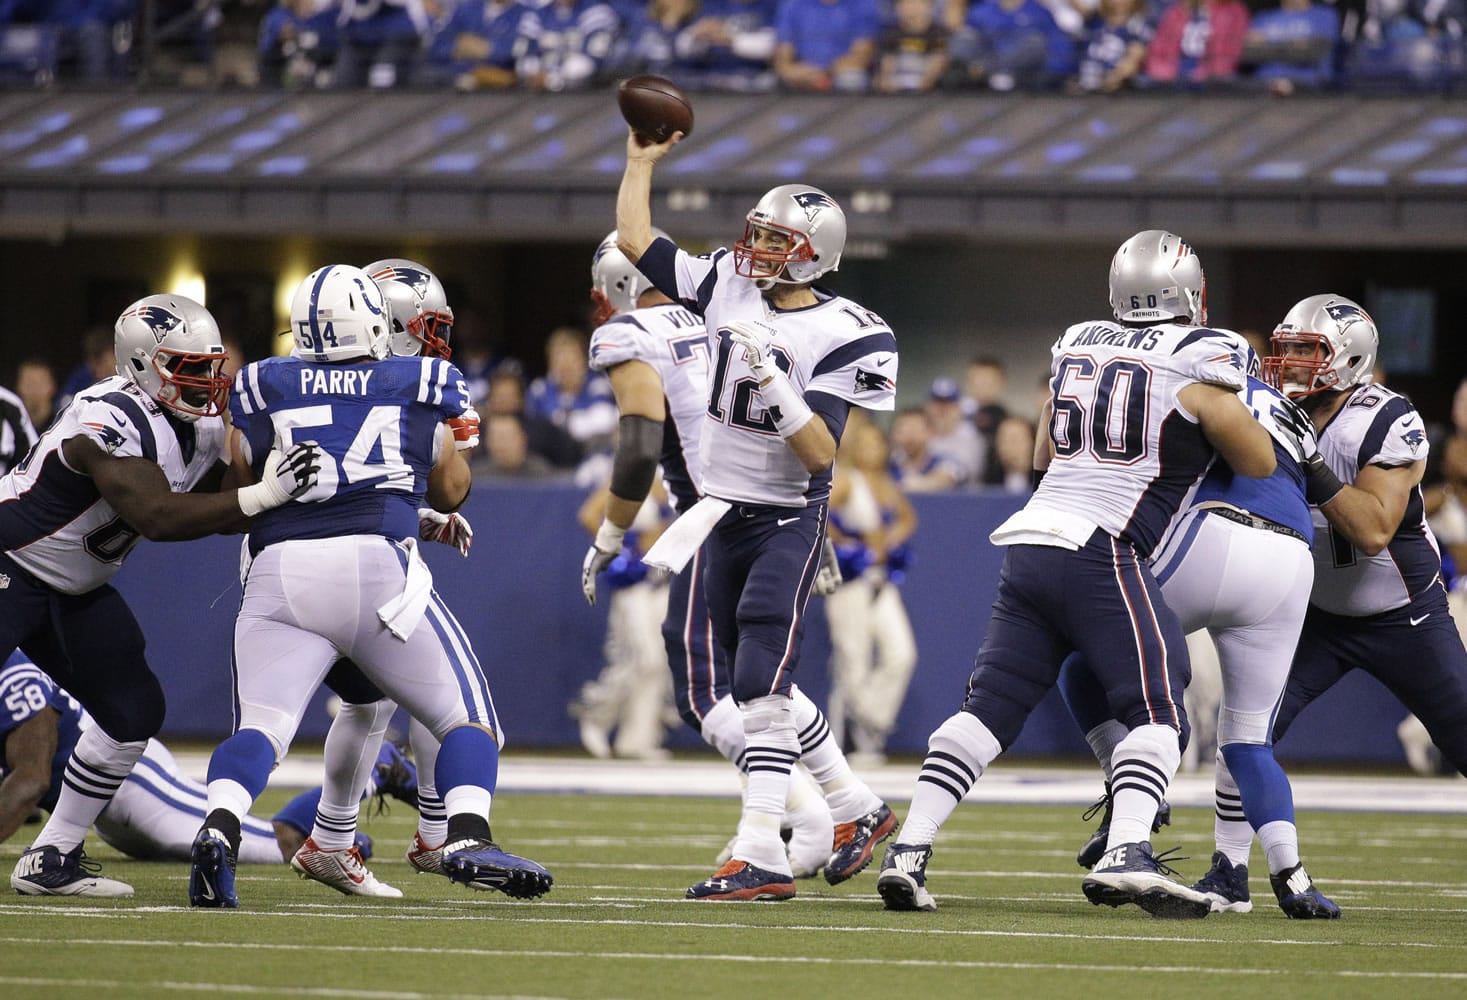 New England Patriots quarterback Tom Brady throws in the second half of an NFL football game against the Indianapolis Colts in Indianapolis, Sunday, Oct. 18, 2015.